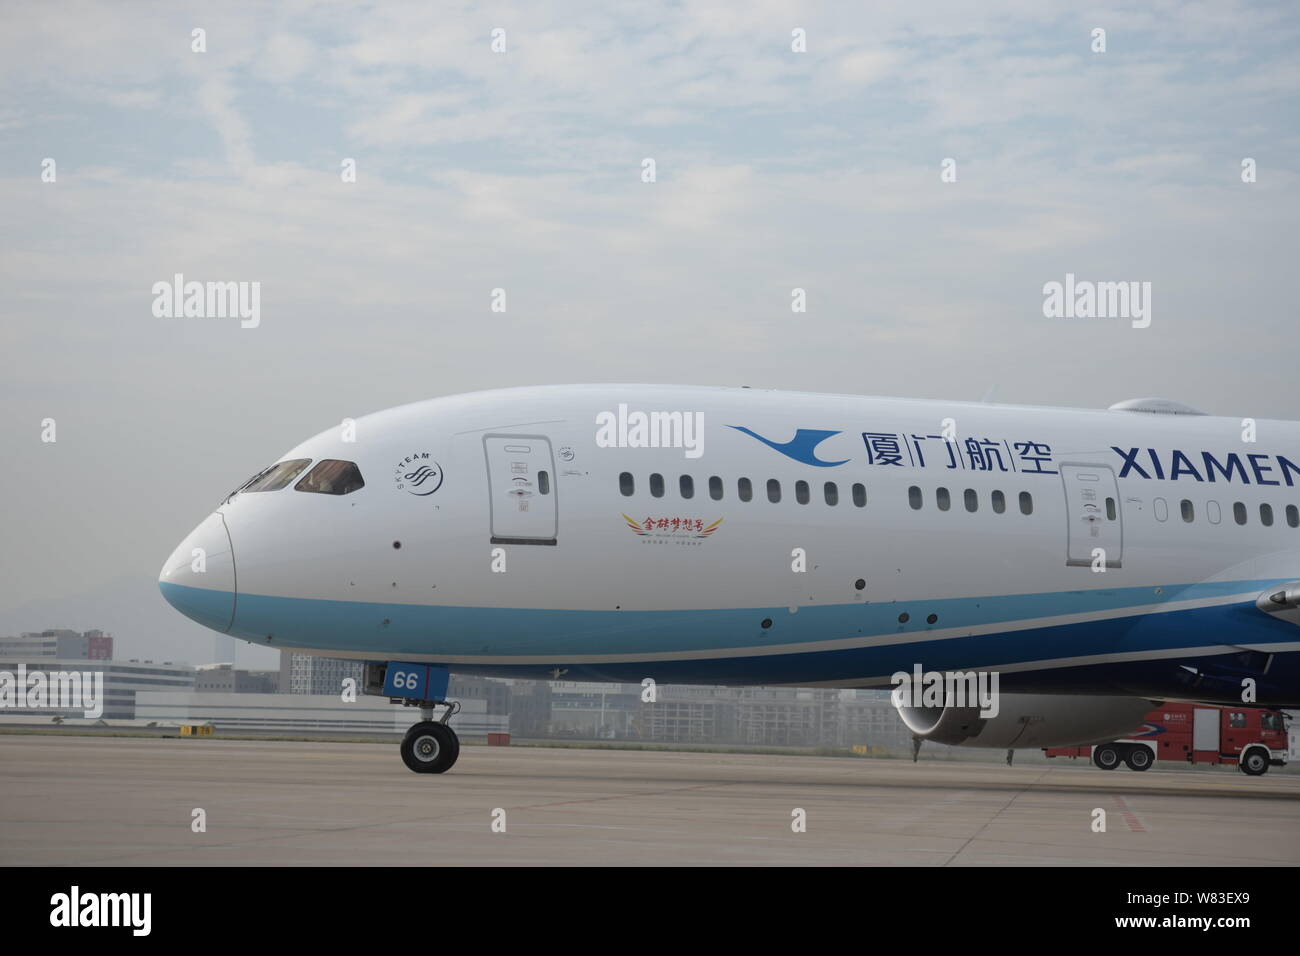 The first Boeing 787-9 Dreamliner of Xiamen Airlines is pictured at the Xiamen Gaoqi International Airport in Xiamen city, southeast China's Fujian pr Stock Photo